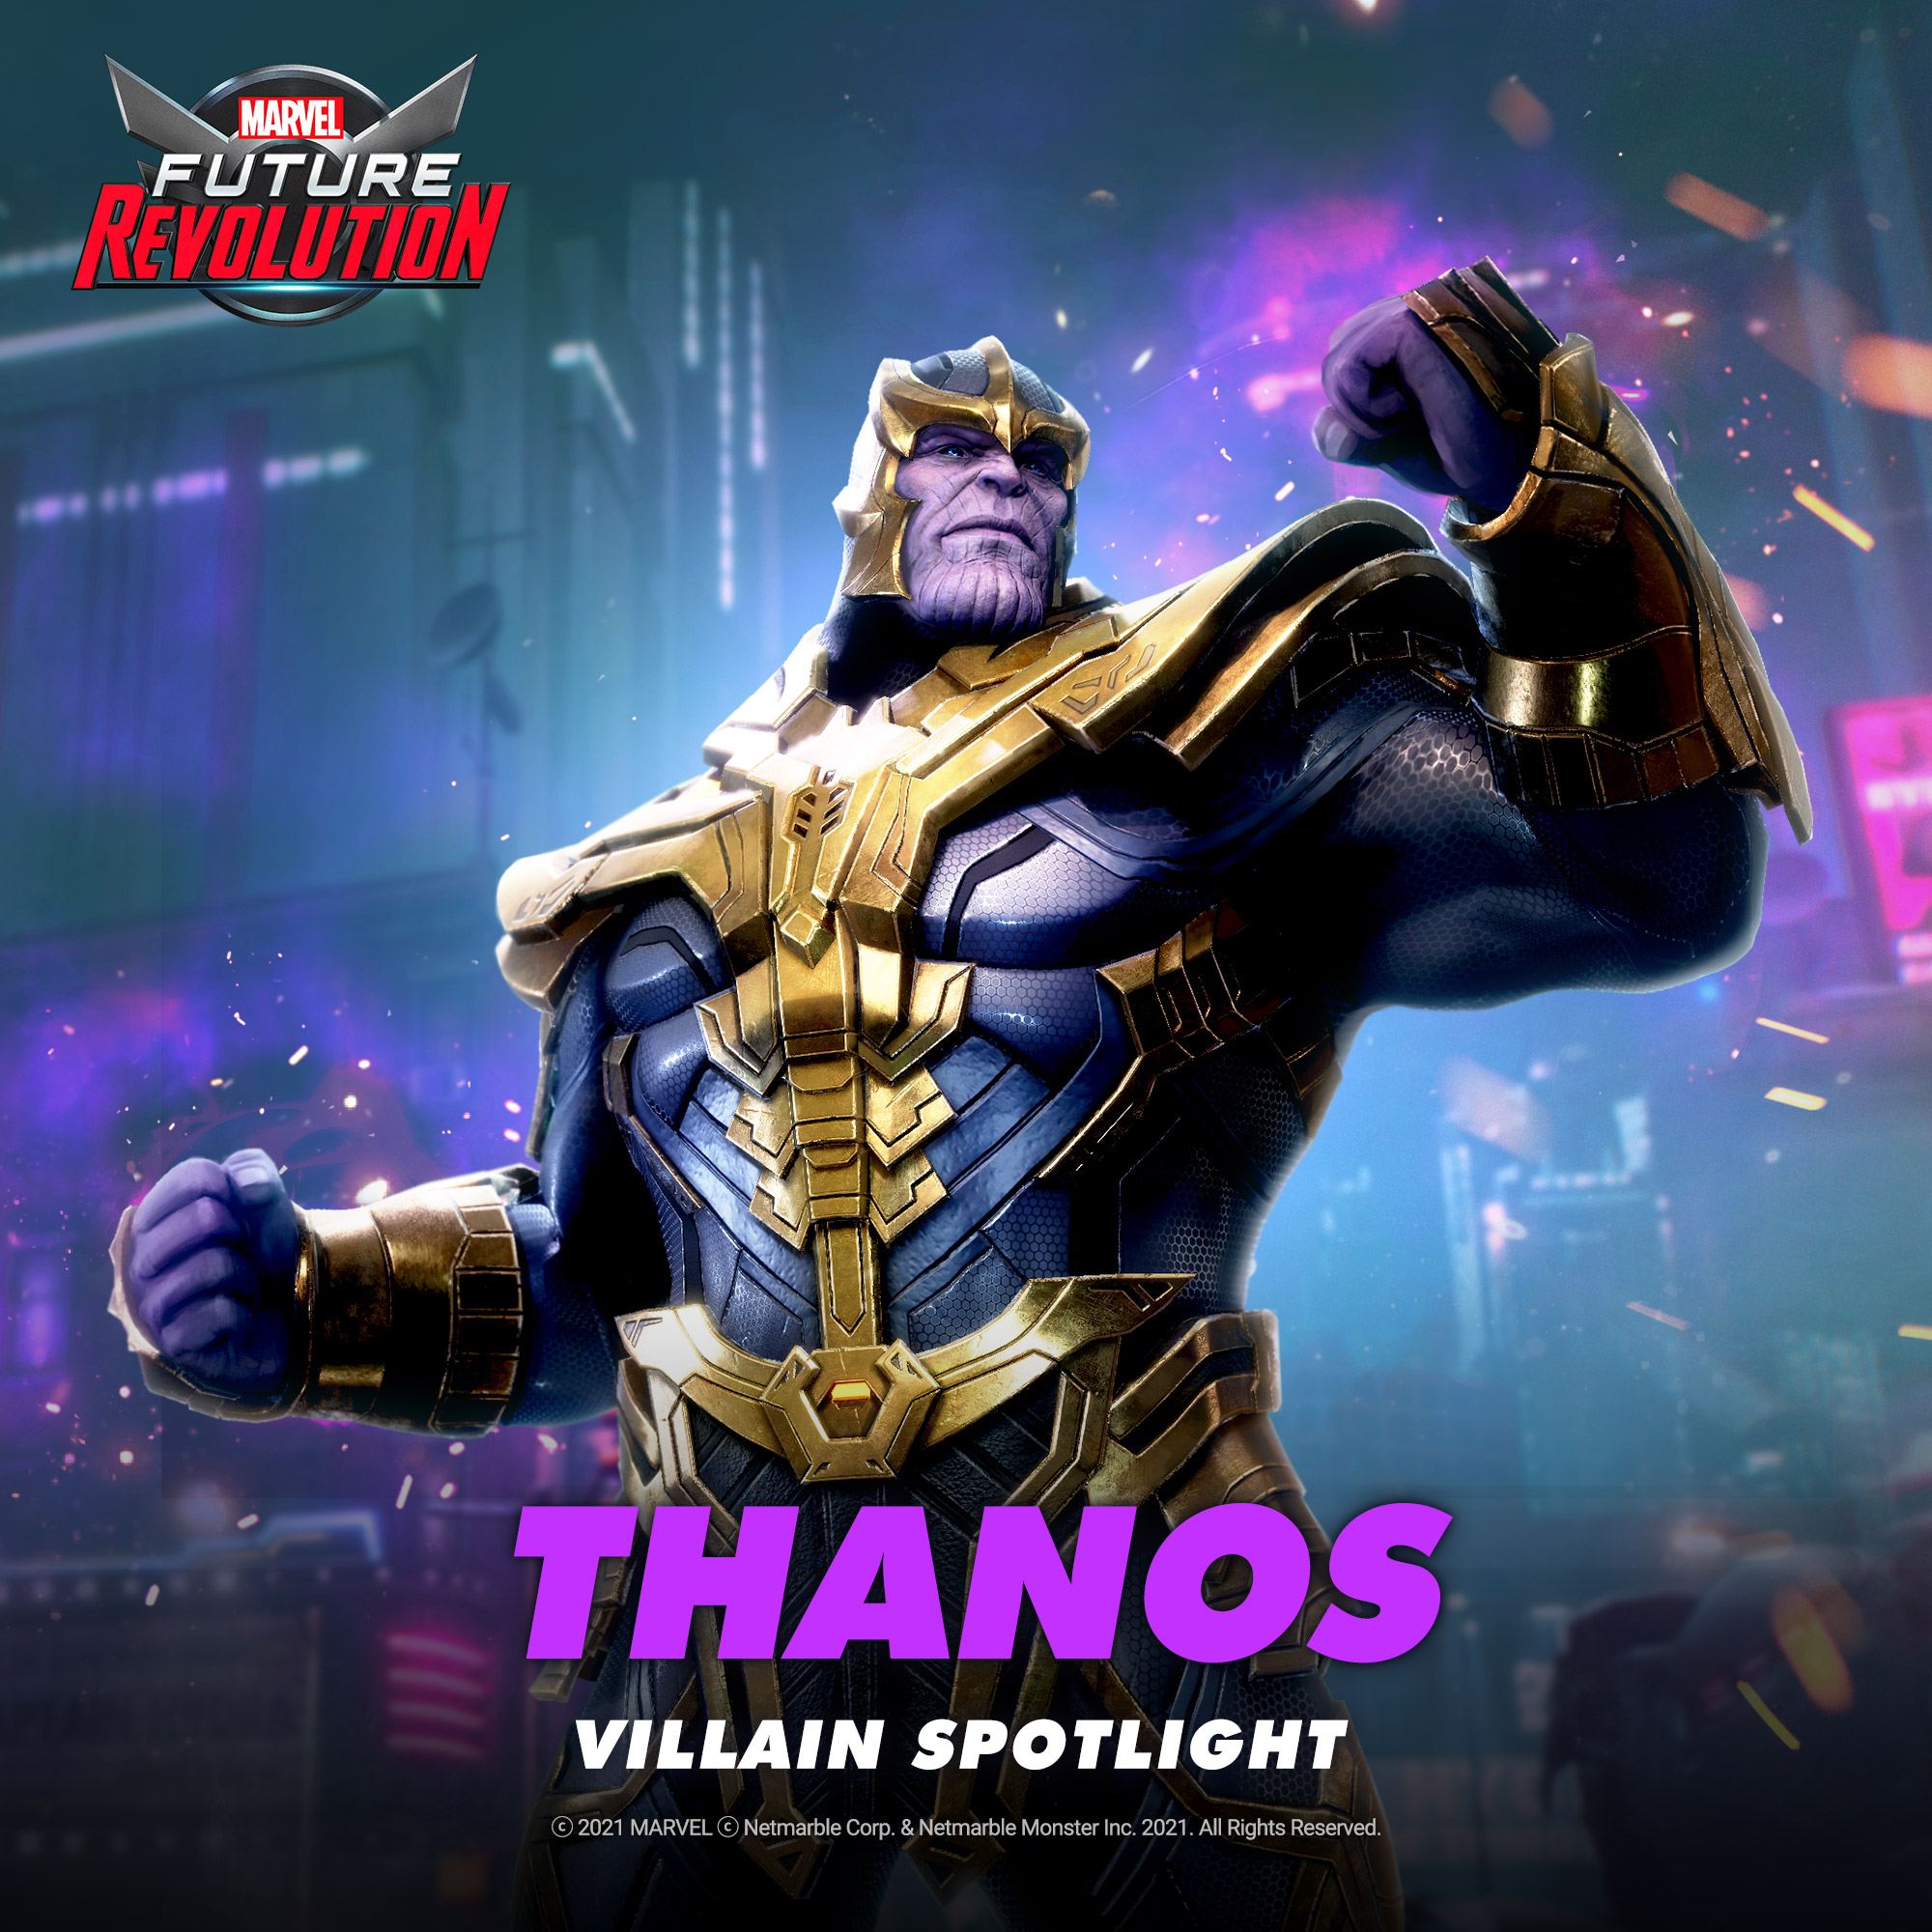 Everything You Need to Know About MARVEL Future Revolution